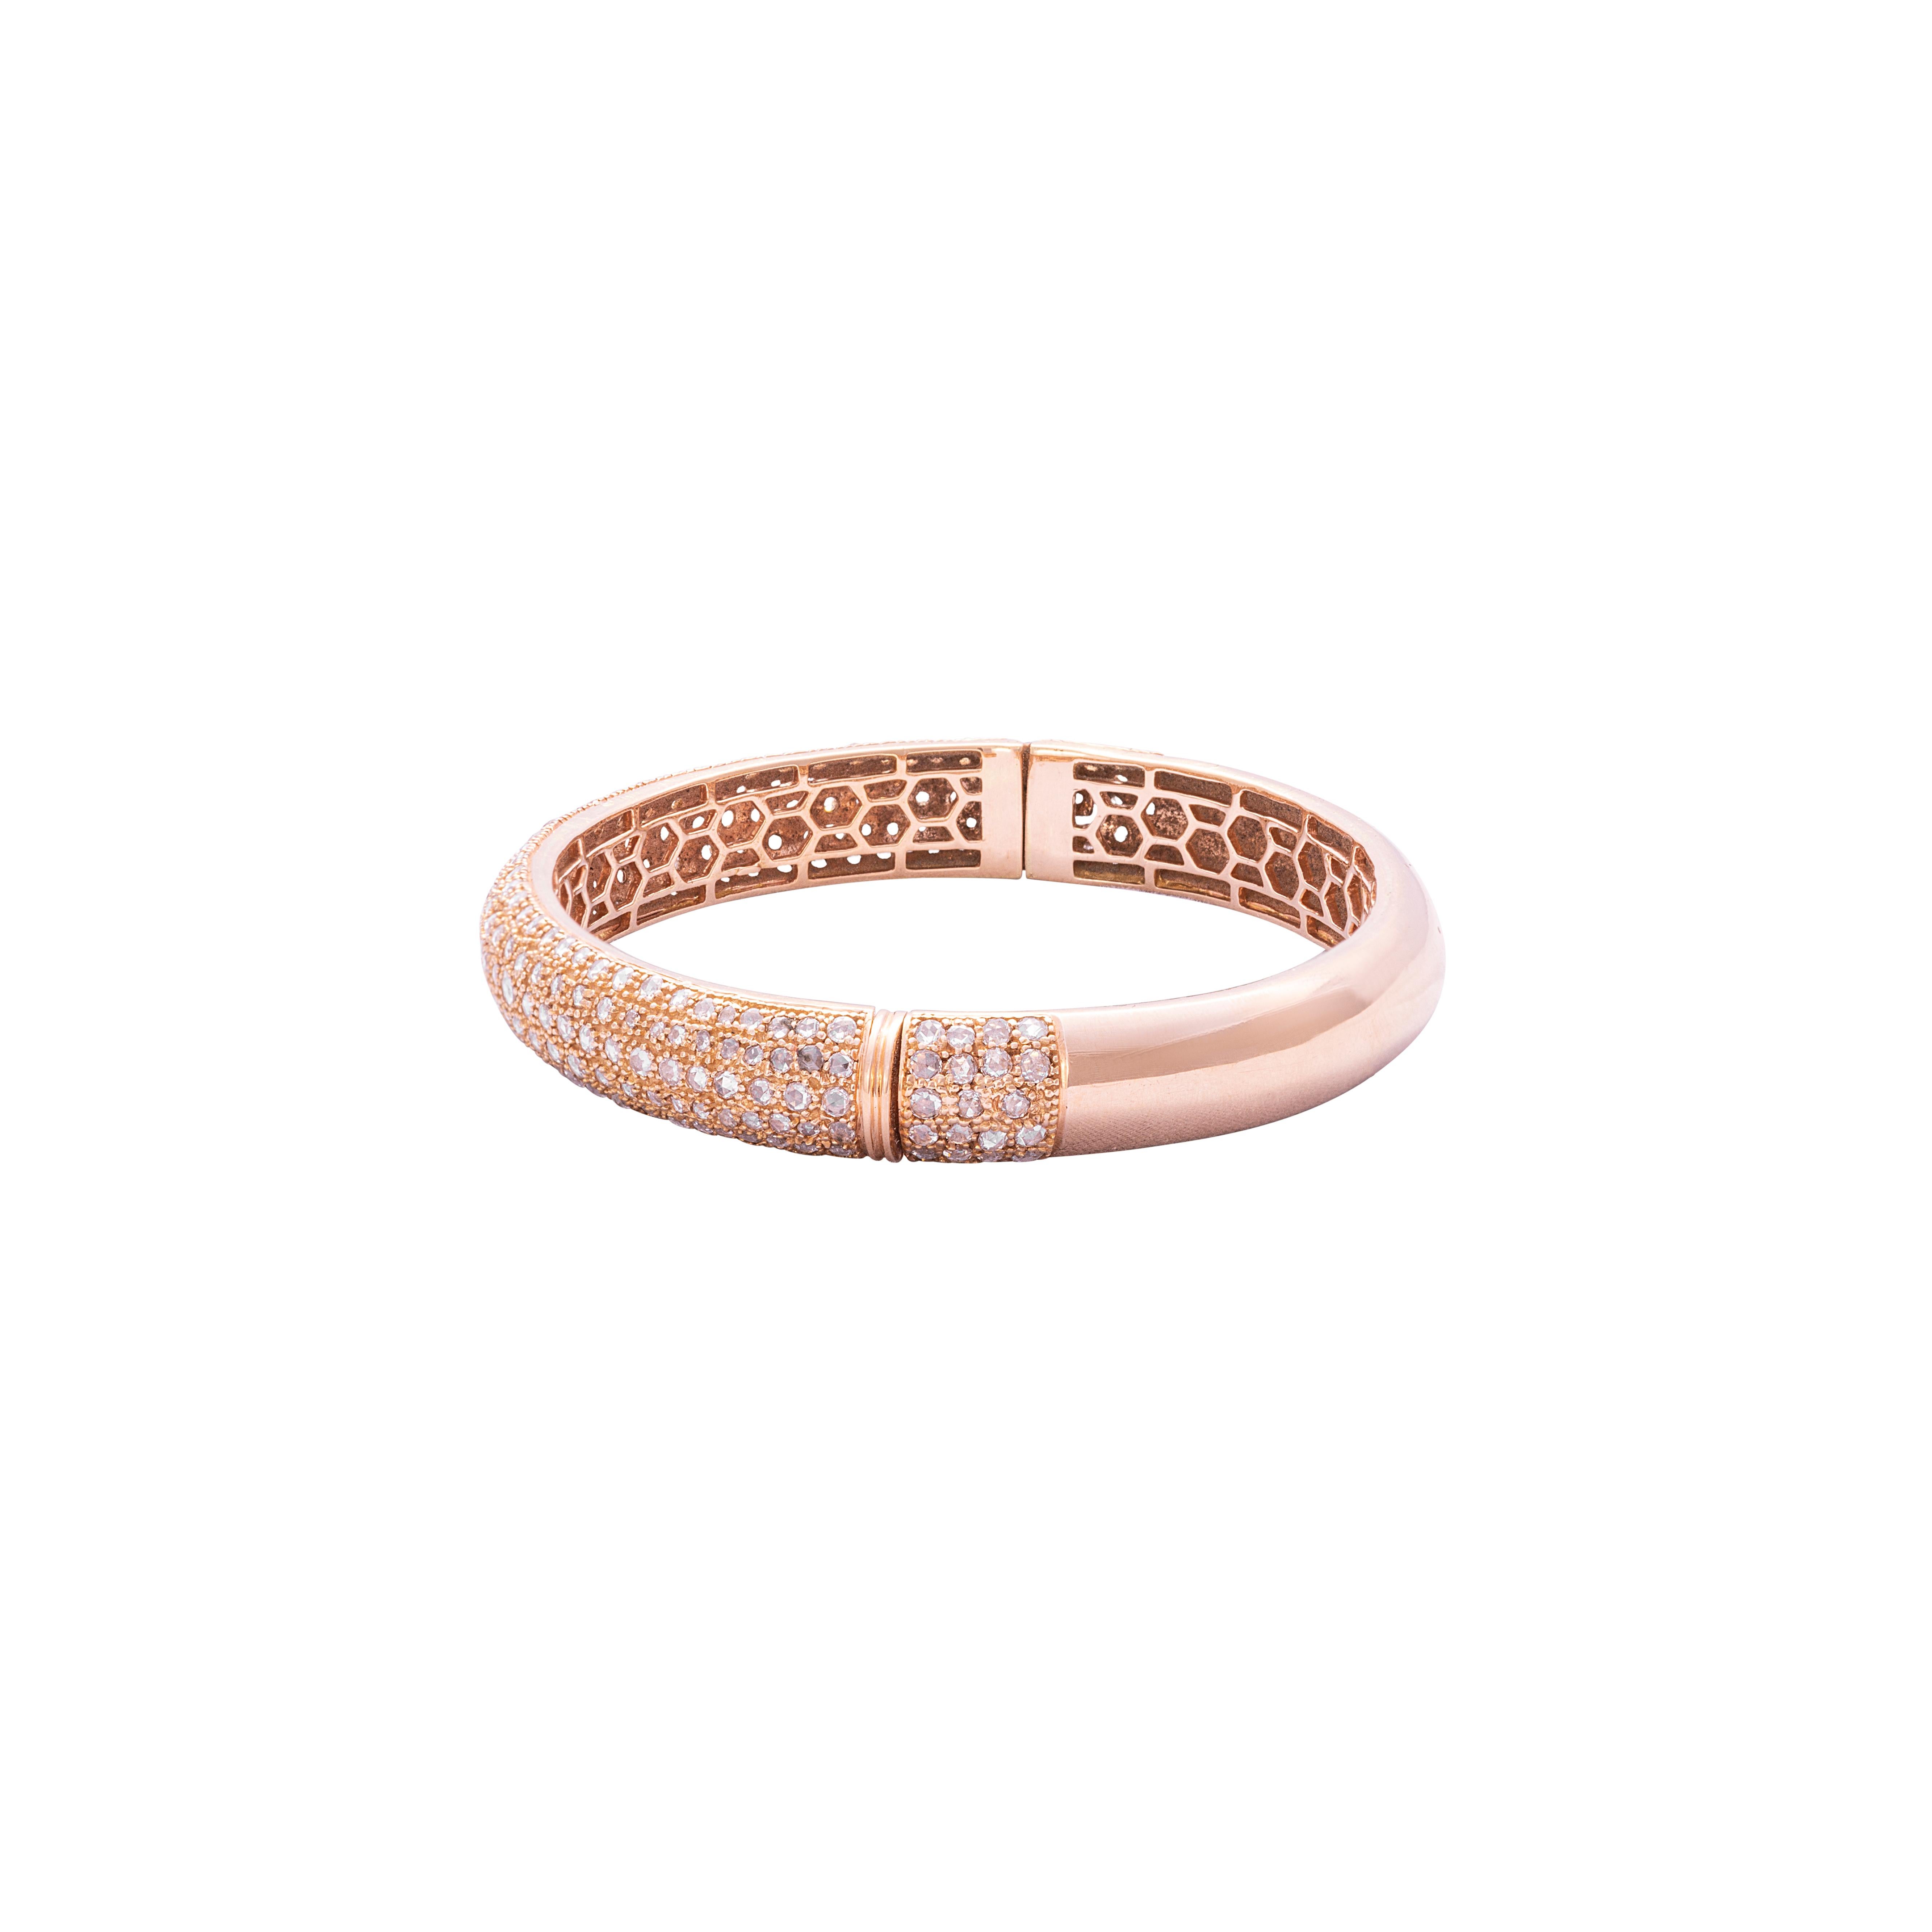 18 Karat Rose Gold Rosecut Diamond Cuff Bracelet

Beautifully crafted cuff bracelet, set in 18 Karat Rose gold studded with rosecut diamonds. The honeycomb design on the inside is indicative of the workmanship and design that sets this bracelet